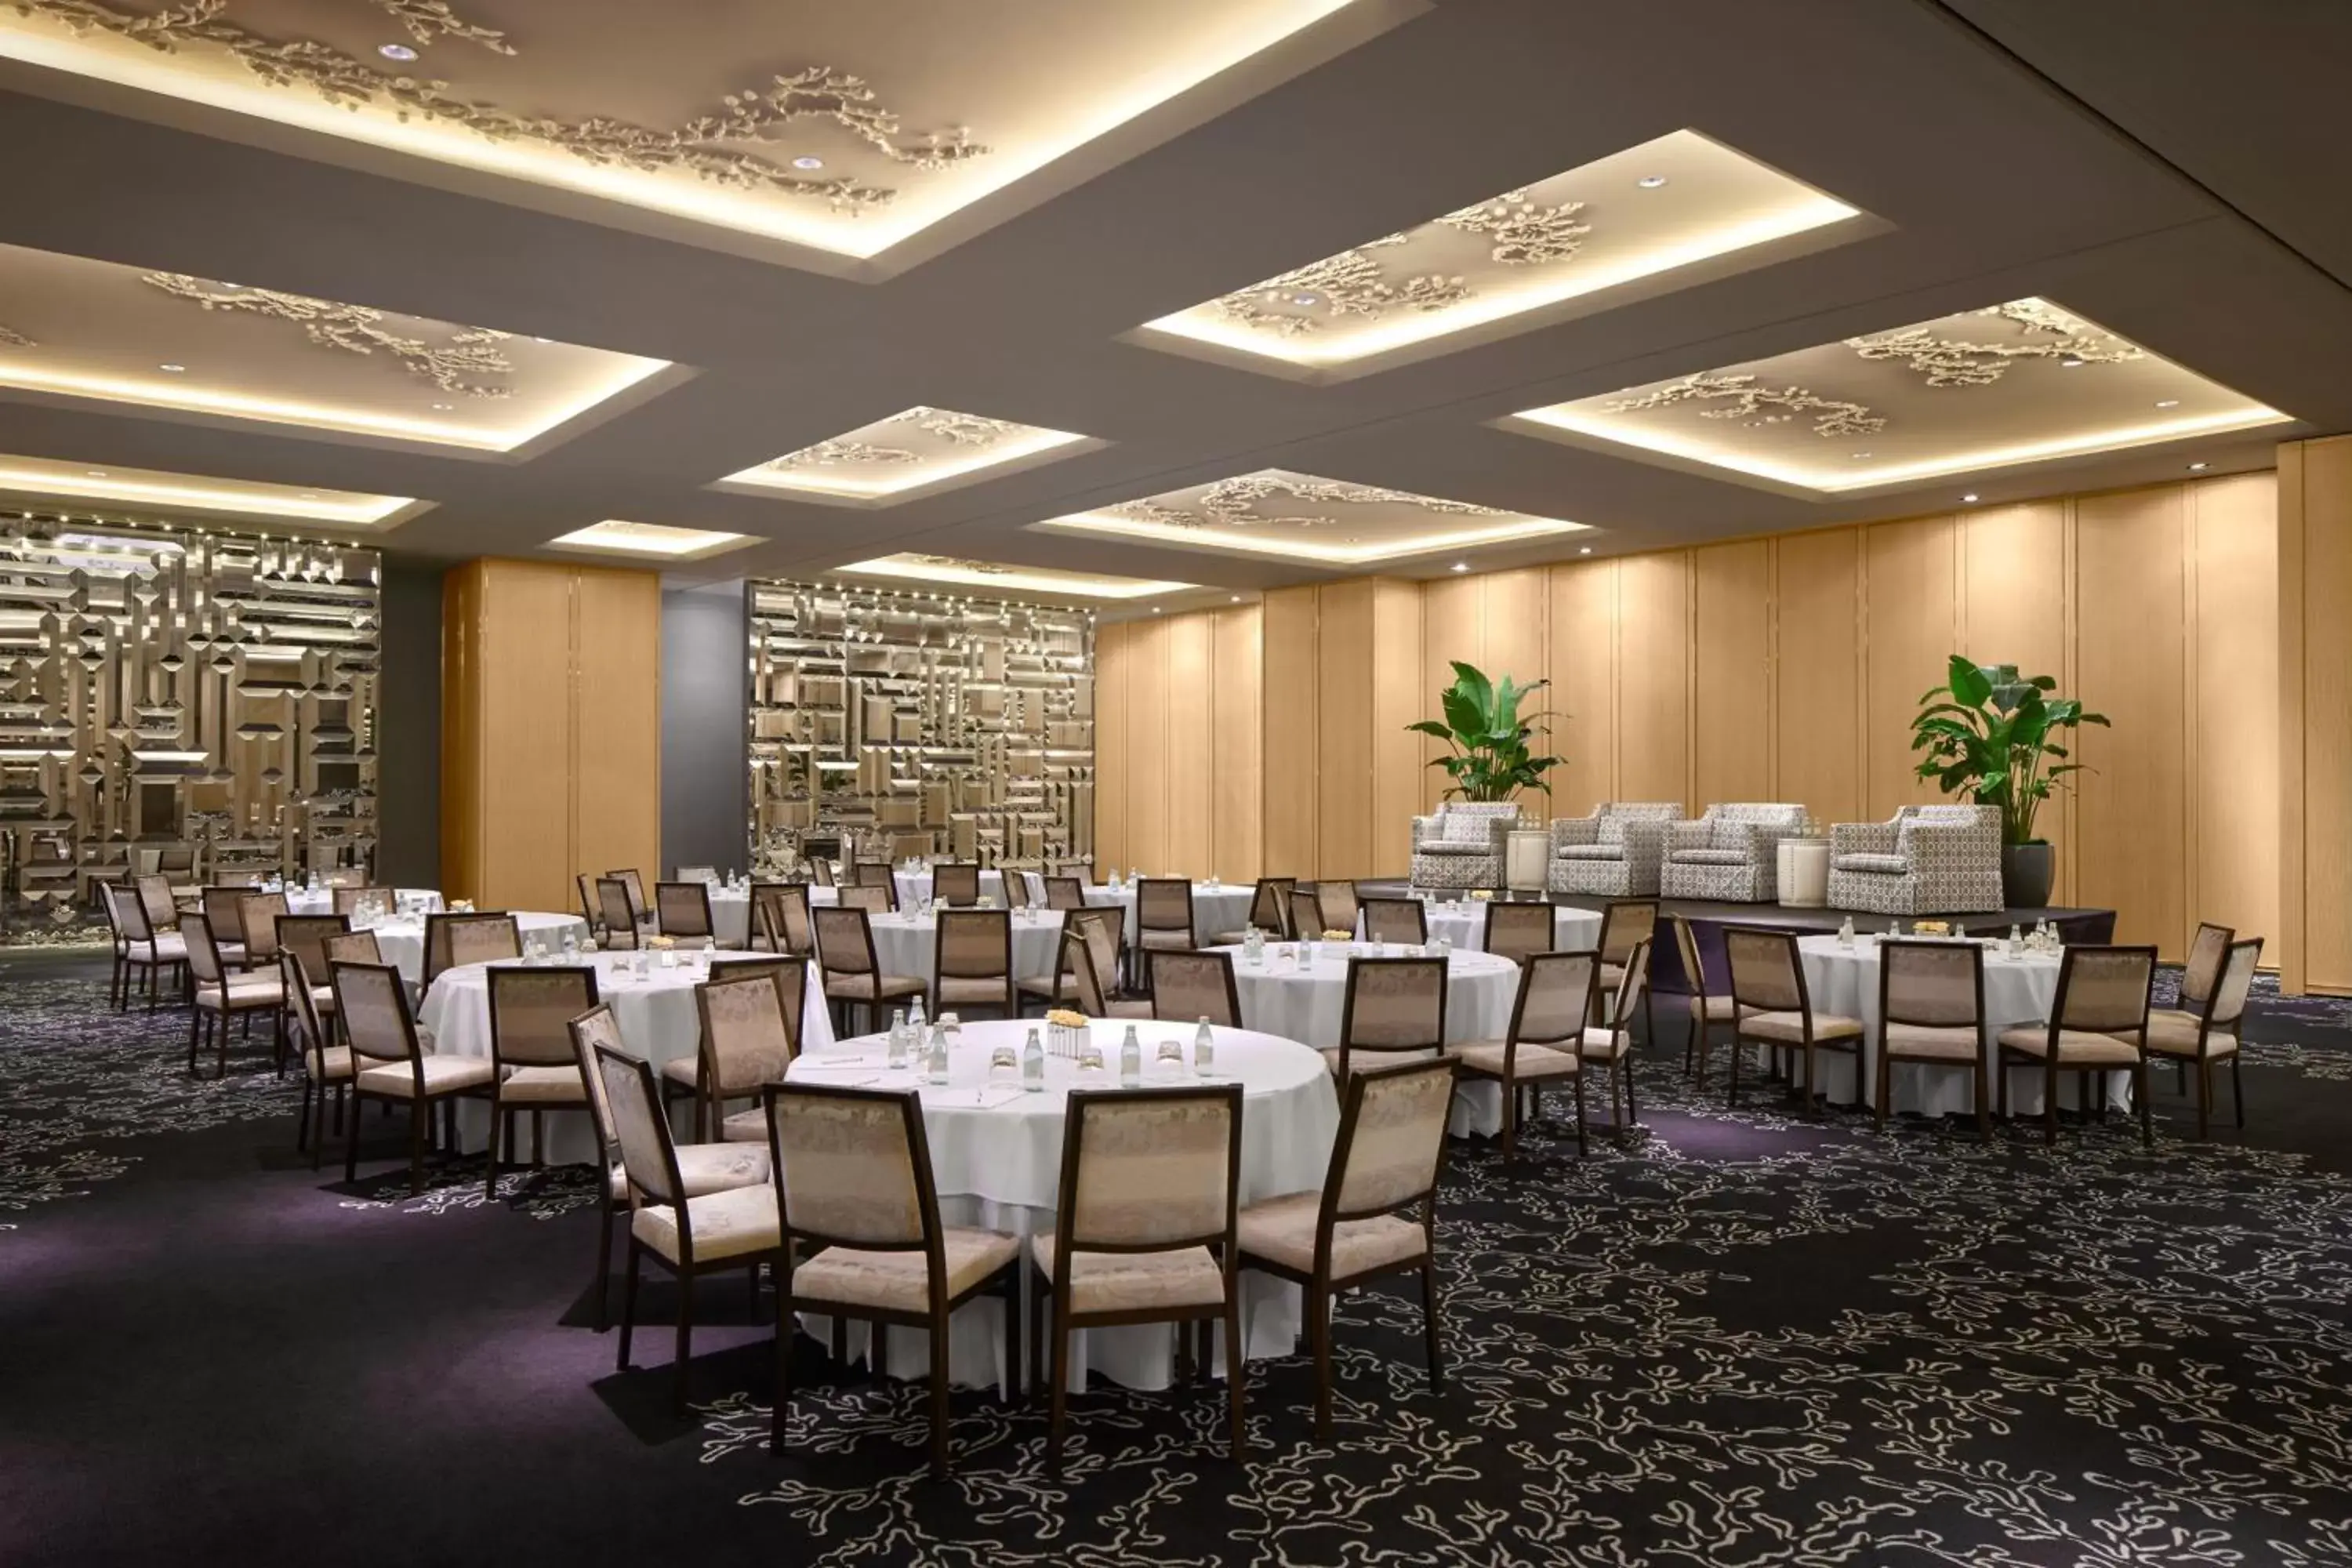 Meeting/conference room, Banquet Facilities in The St Regis Bal Harbour Resort